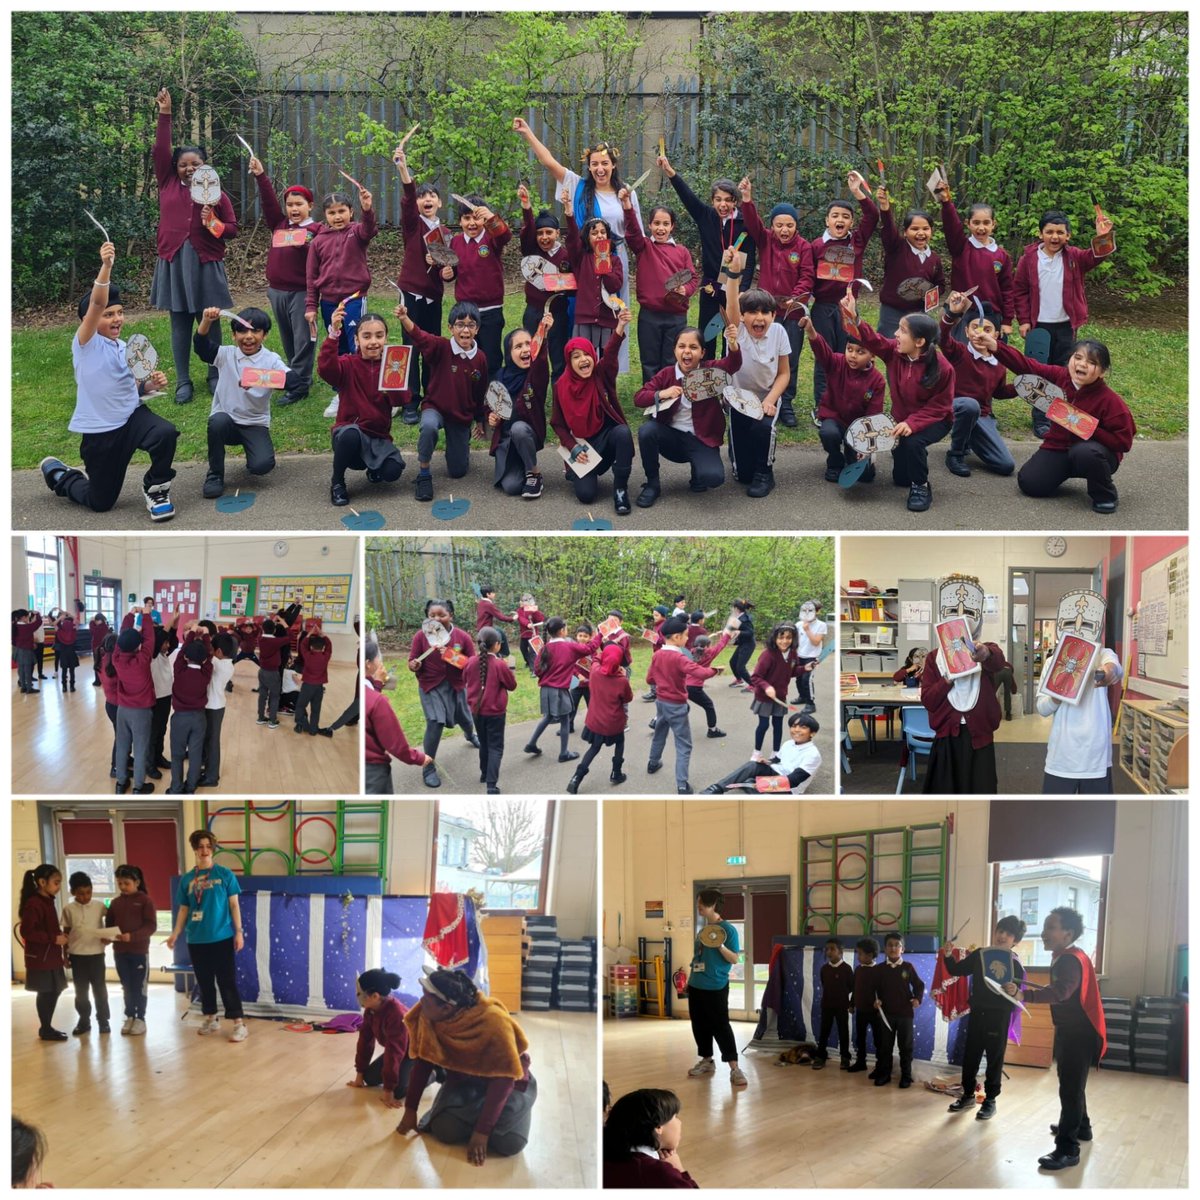 #Year 3 held a Roman Day as part of our learning of the Roman Invasion in Britain. We enjoyed a Roman drama workshop and spent the afternoon creating Roman artefacts #RomanEmpire #drama